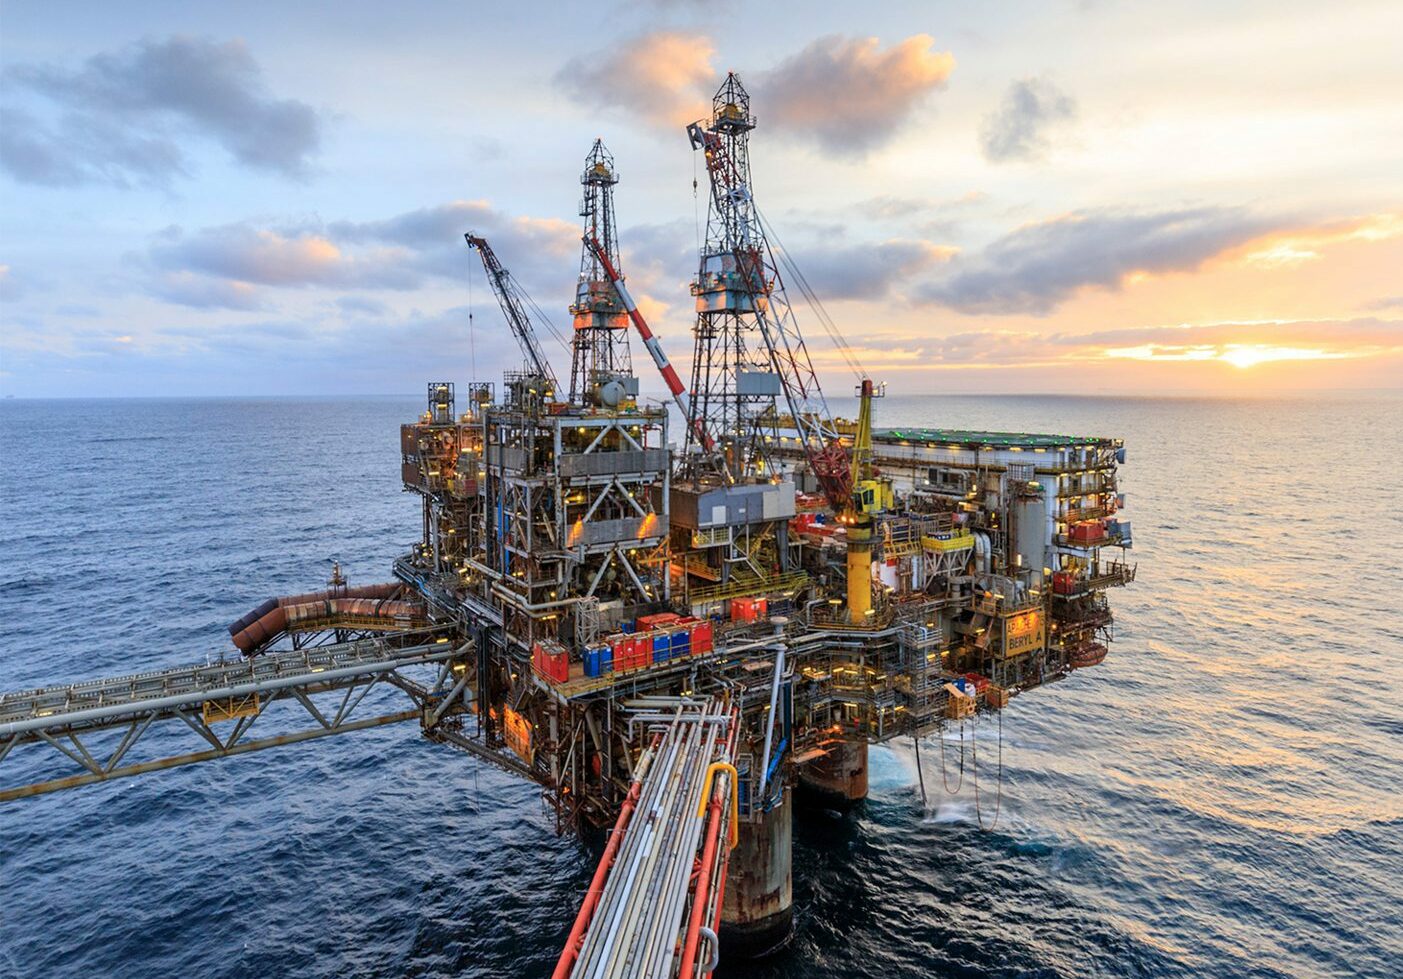 Who have been the UK North Sea exploration standouts?